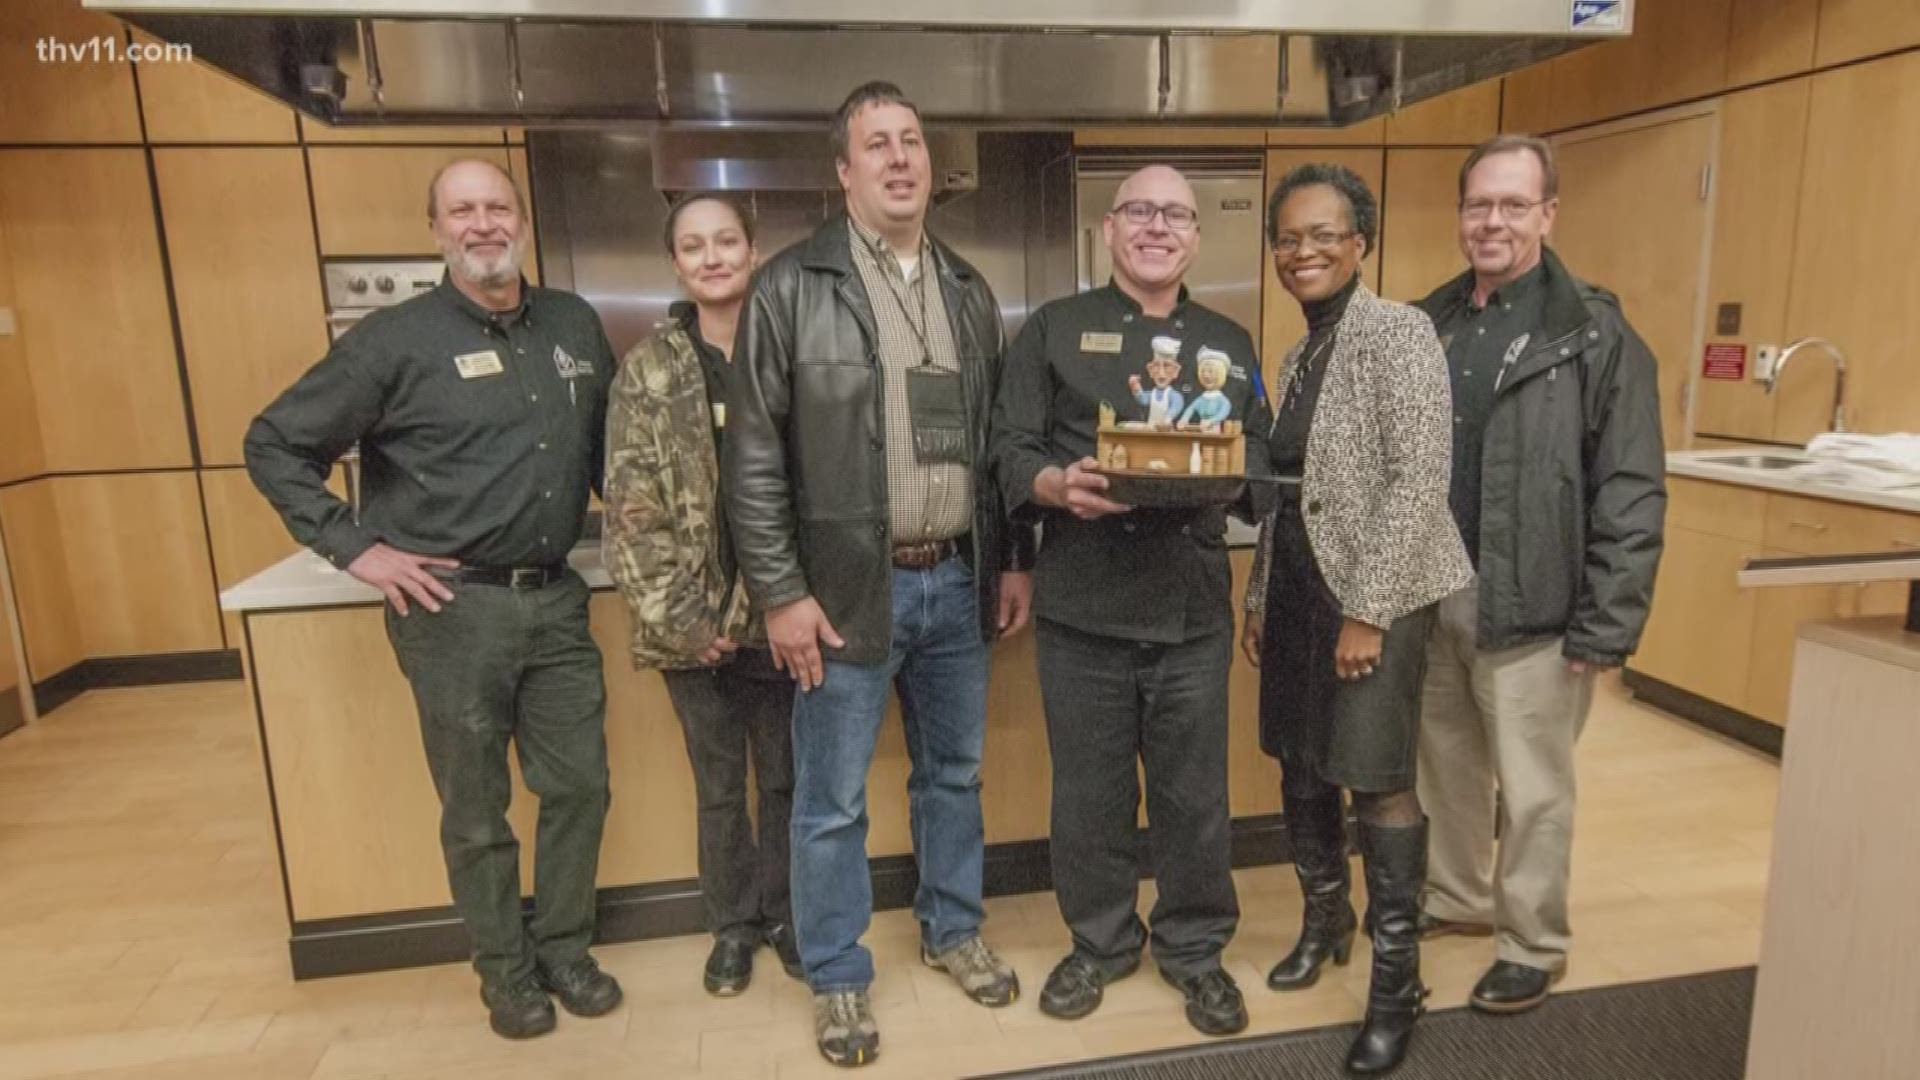 The winner is announced, for Arkansas State Parks' annual "Top Chef" competition!